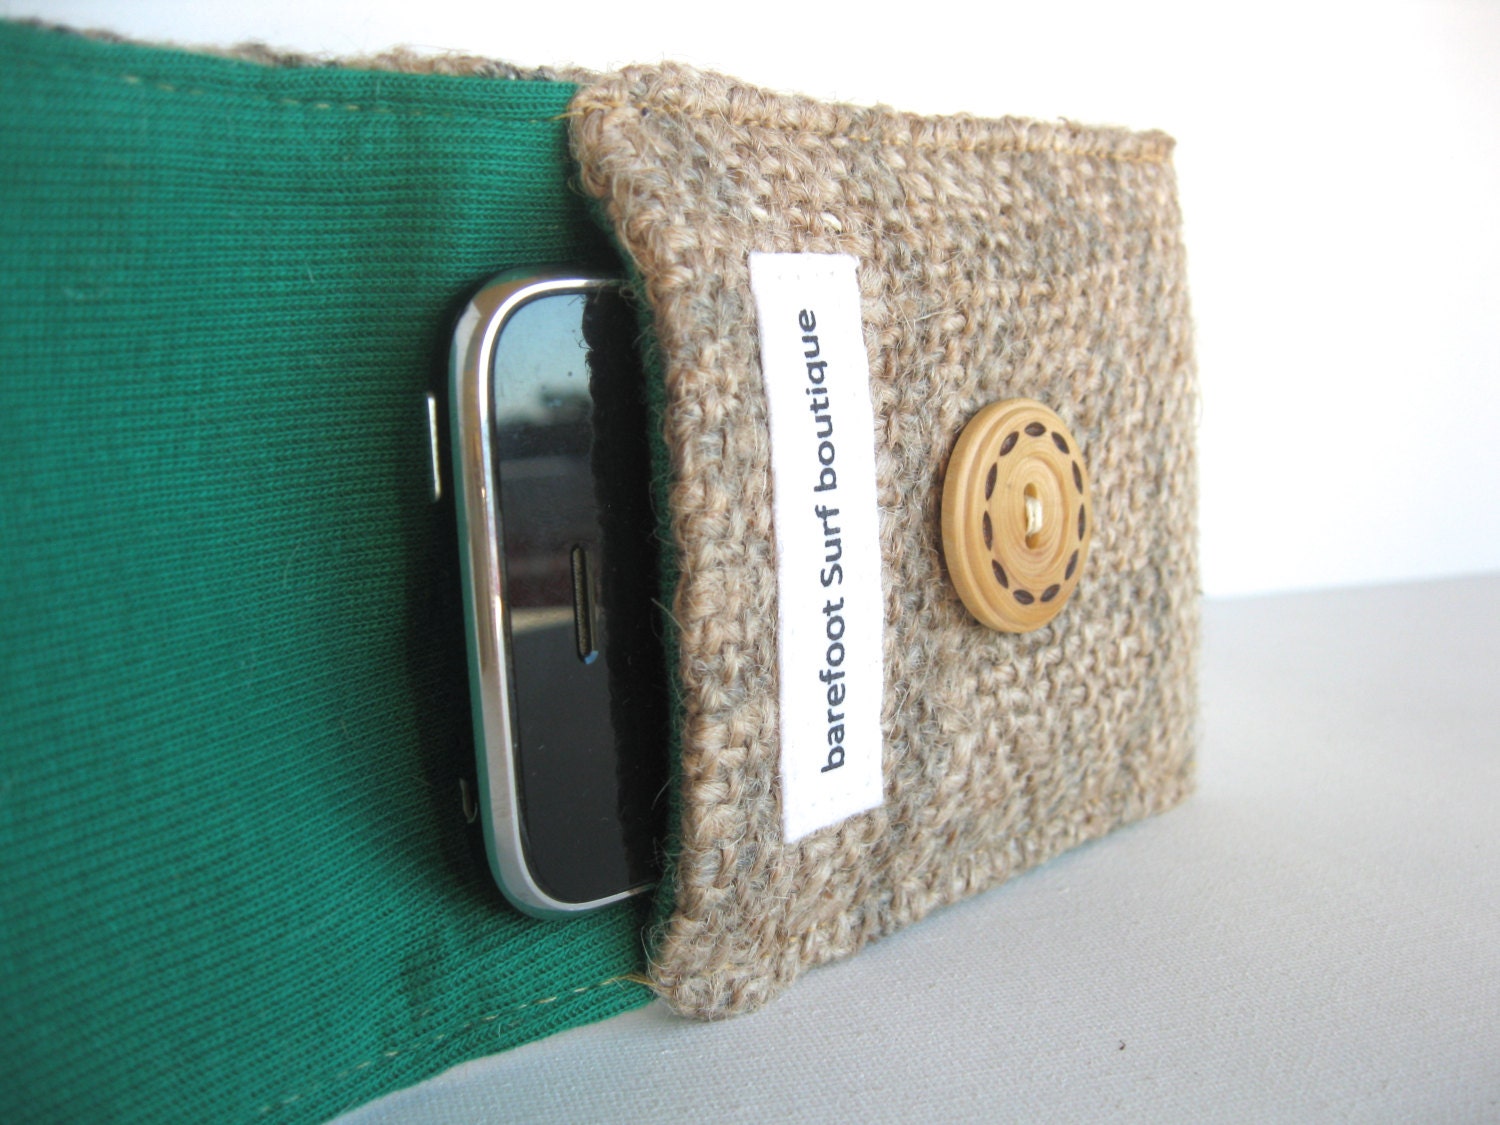 Emerald. Green. Leaf. Eco. Iphone. Cozy. Upcycled. Burlap. Tshirt. Spring Fashion. Earth Day. For Her. Teen. Tween. Gift Idea.